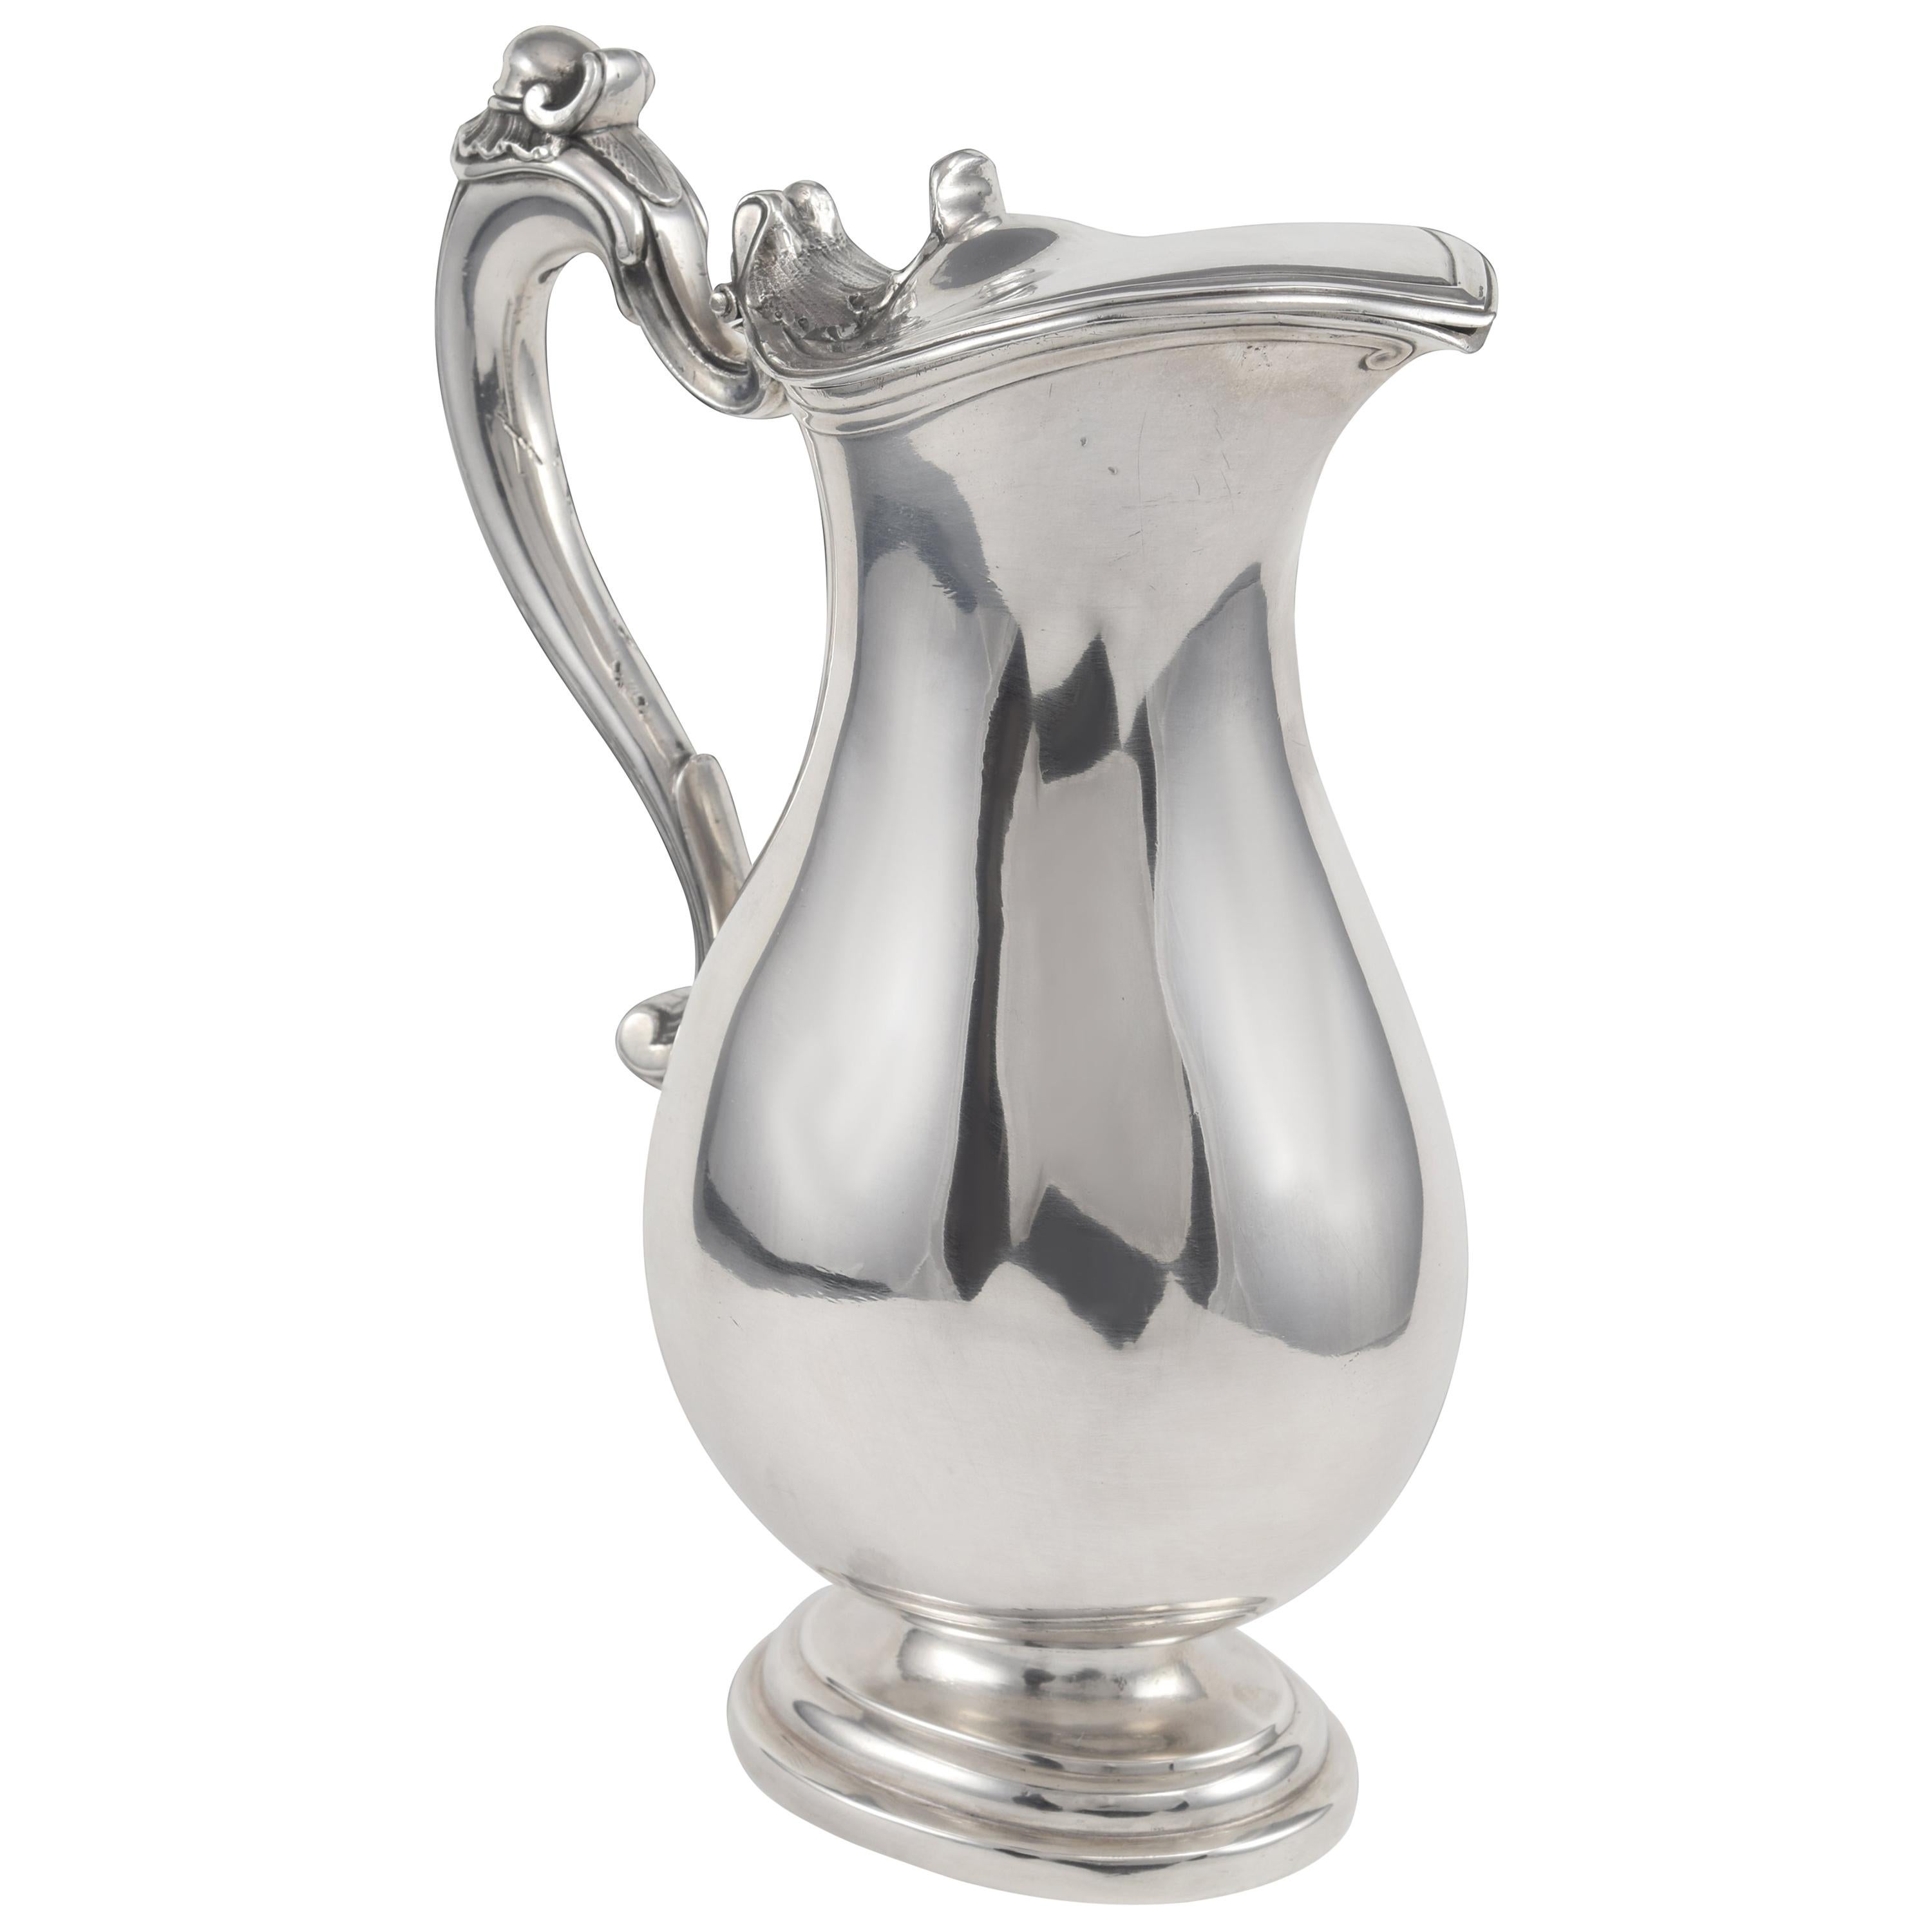 Silver Pitcher or Jar, Madrid, Spain, 1790, with Hallmarks